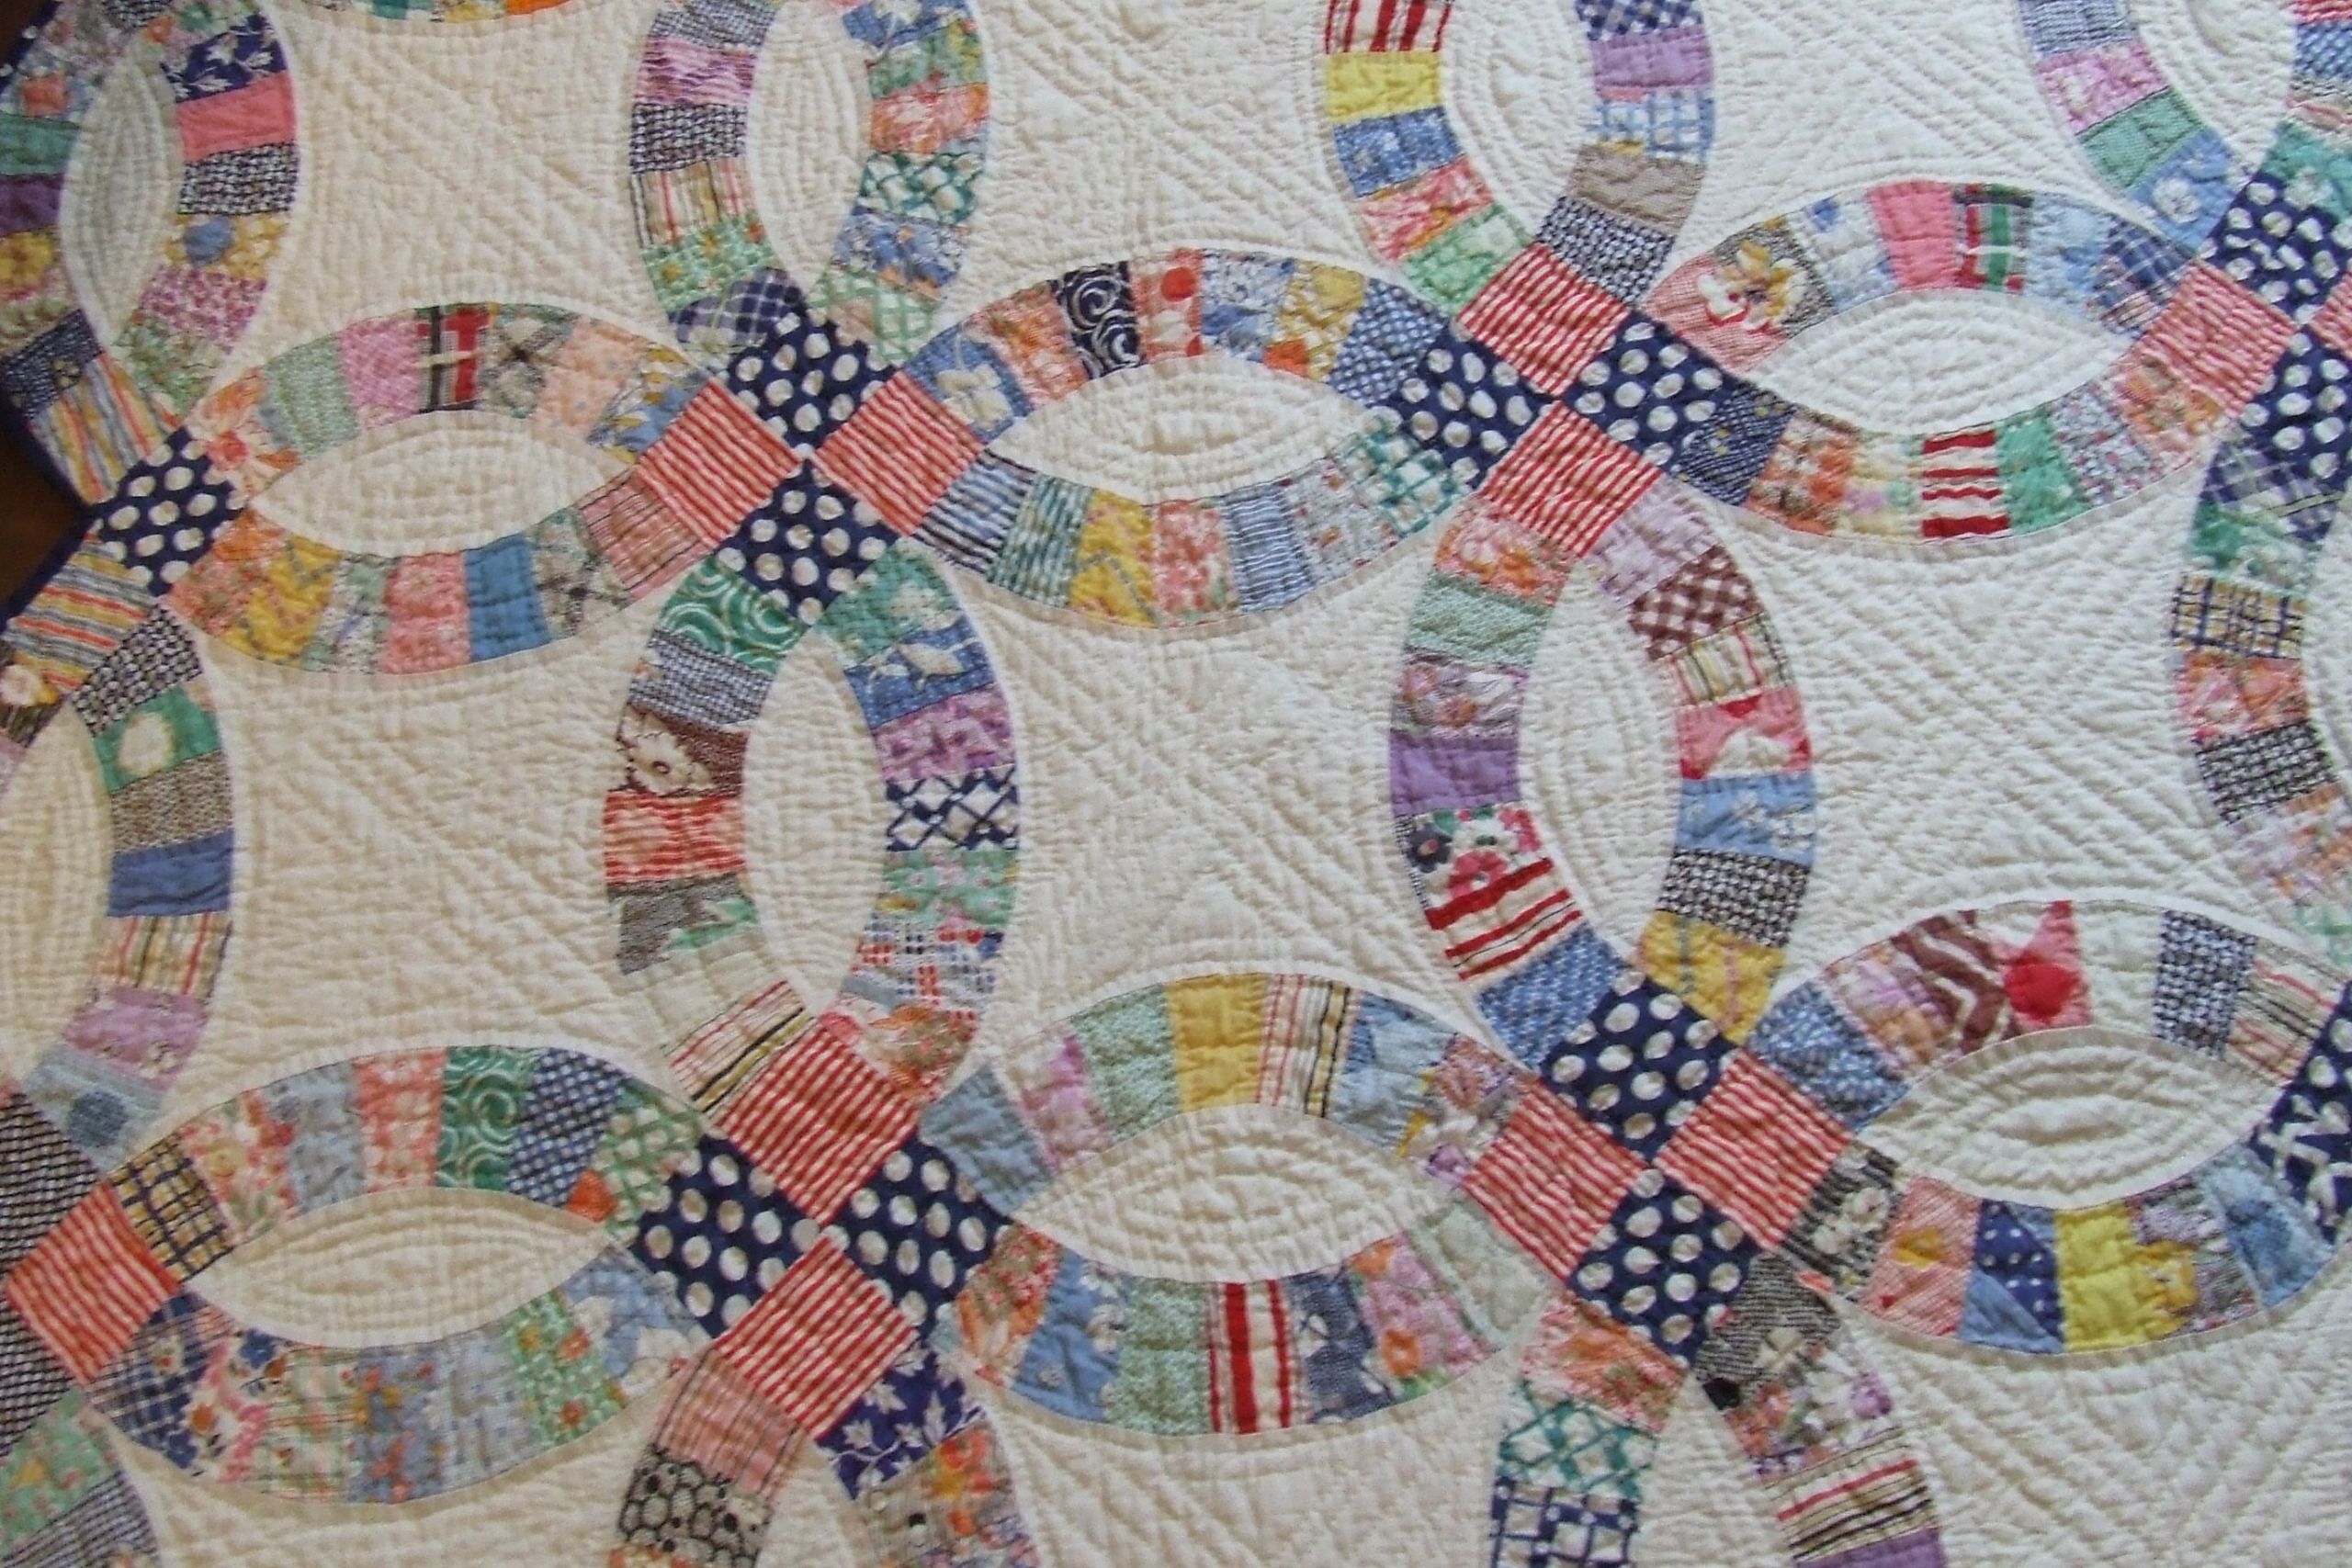 Wedding Ring Quilt
 Double wedding ring quilt